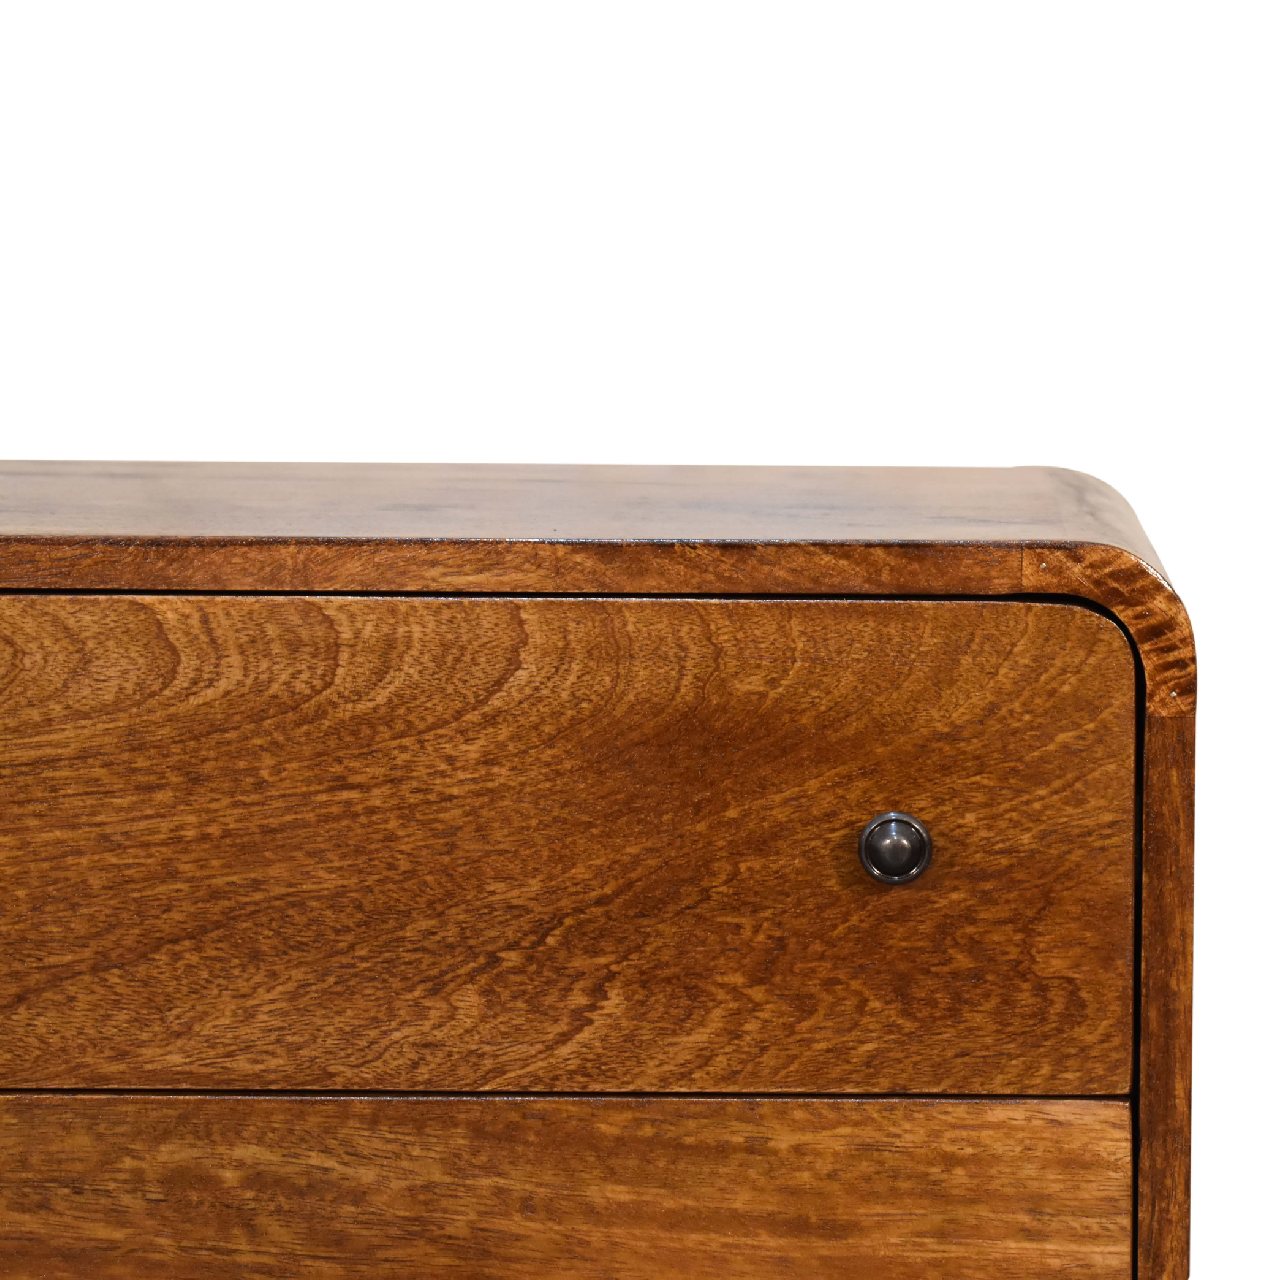 Mini Century Solid Wood Compact Chest of Drawers in Deep Chestnut finish | Malletandplane.com